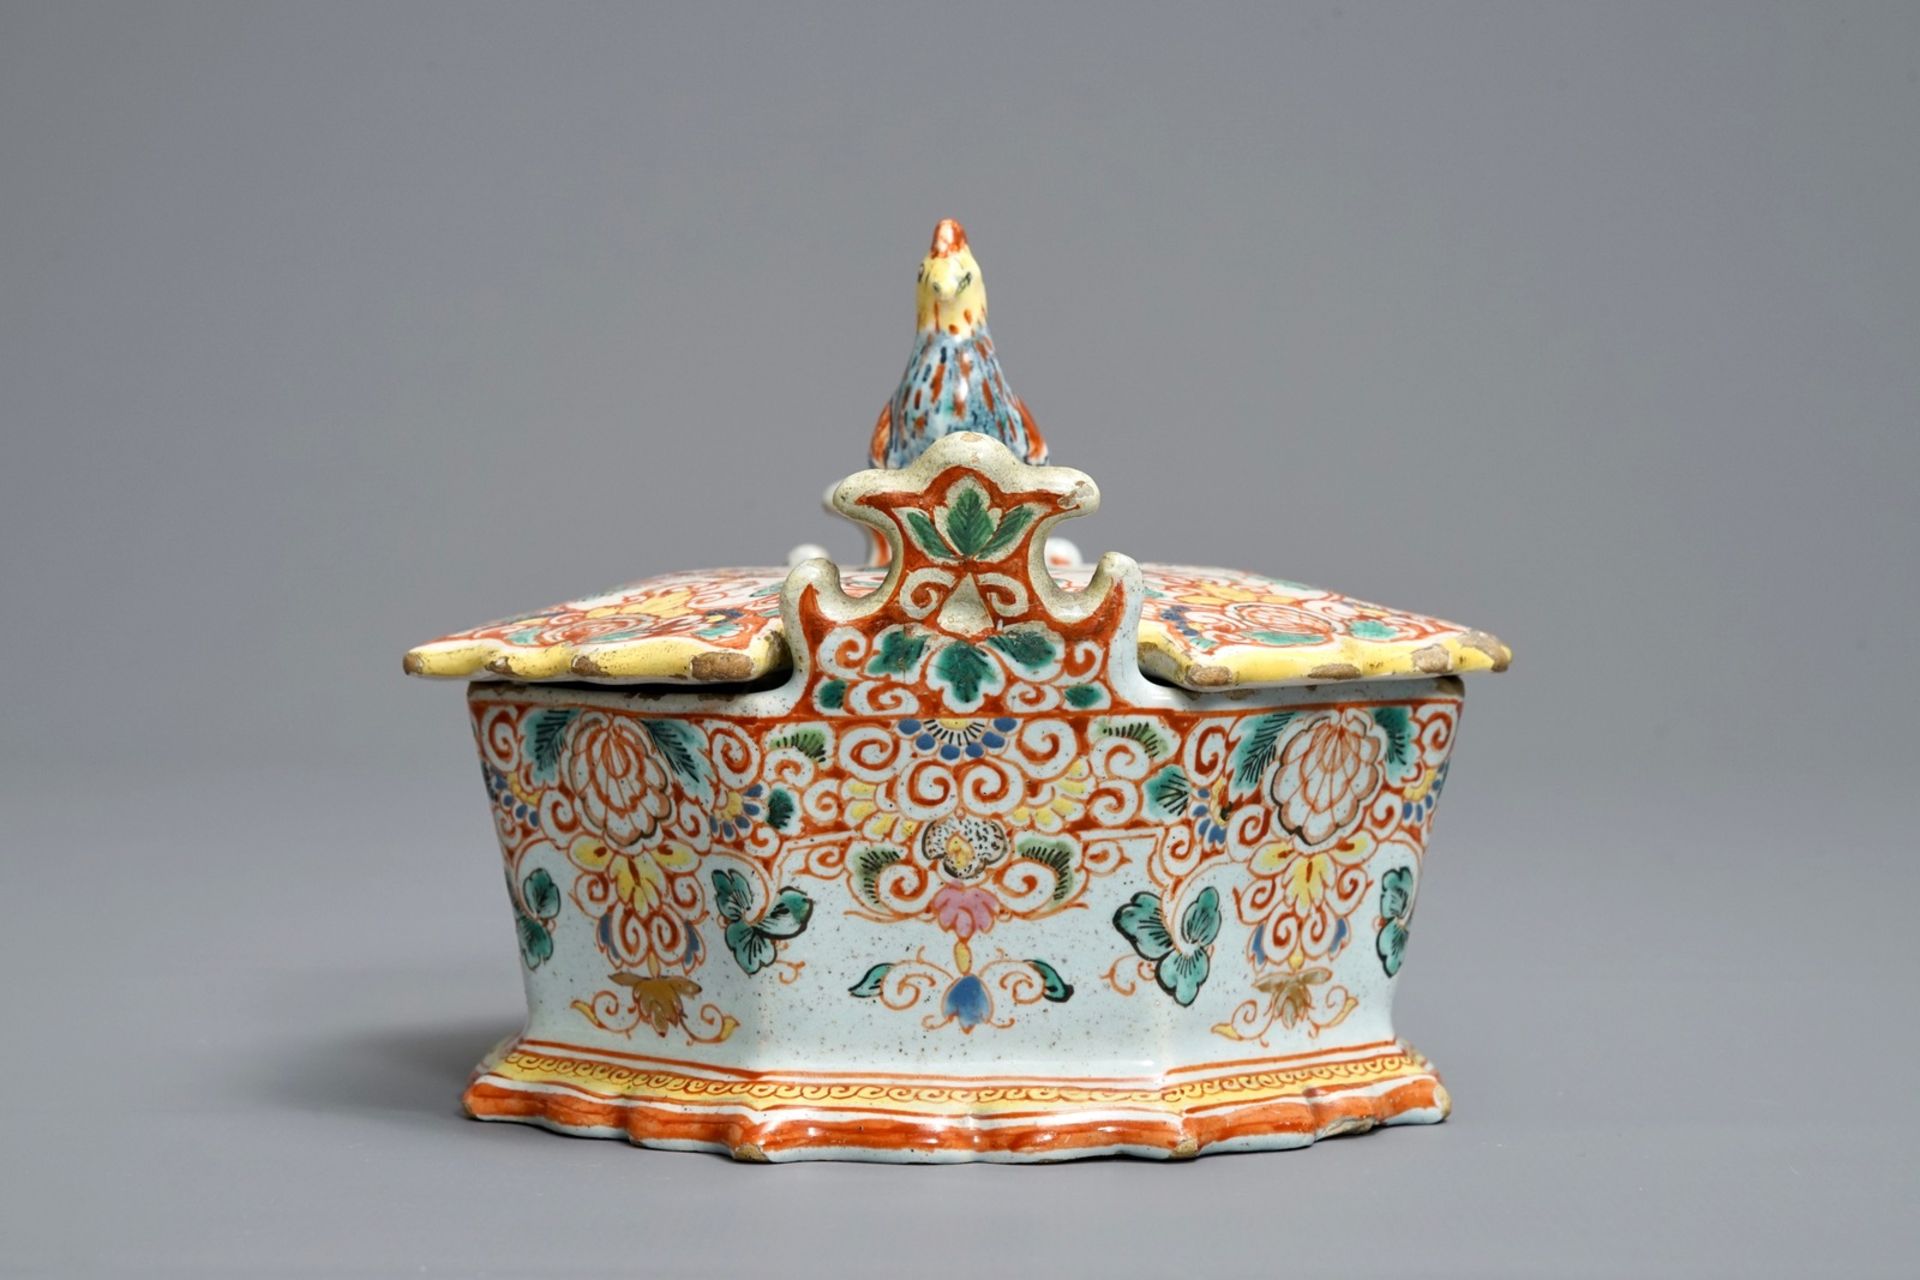 A polychrome petit feu and gilded Dutch Delft rooster-topped butter tub, 1st half 18th C. - Image 5 of 8